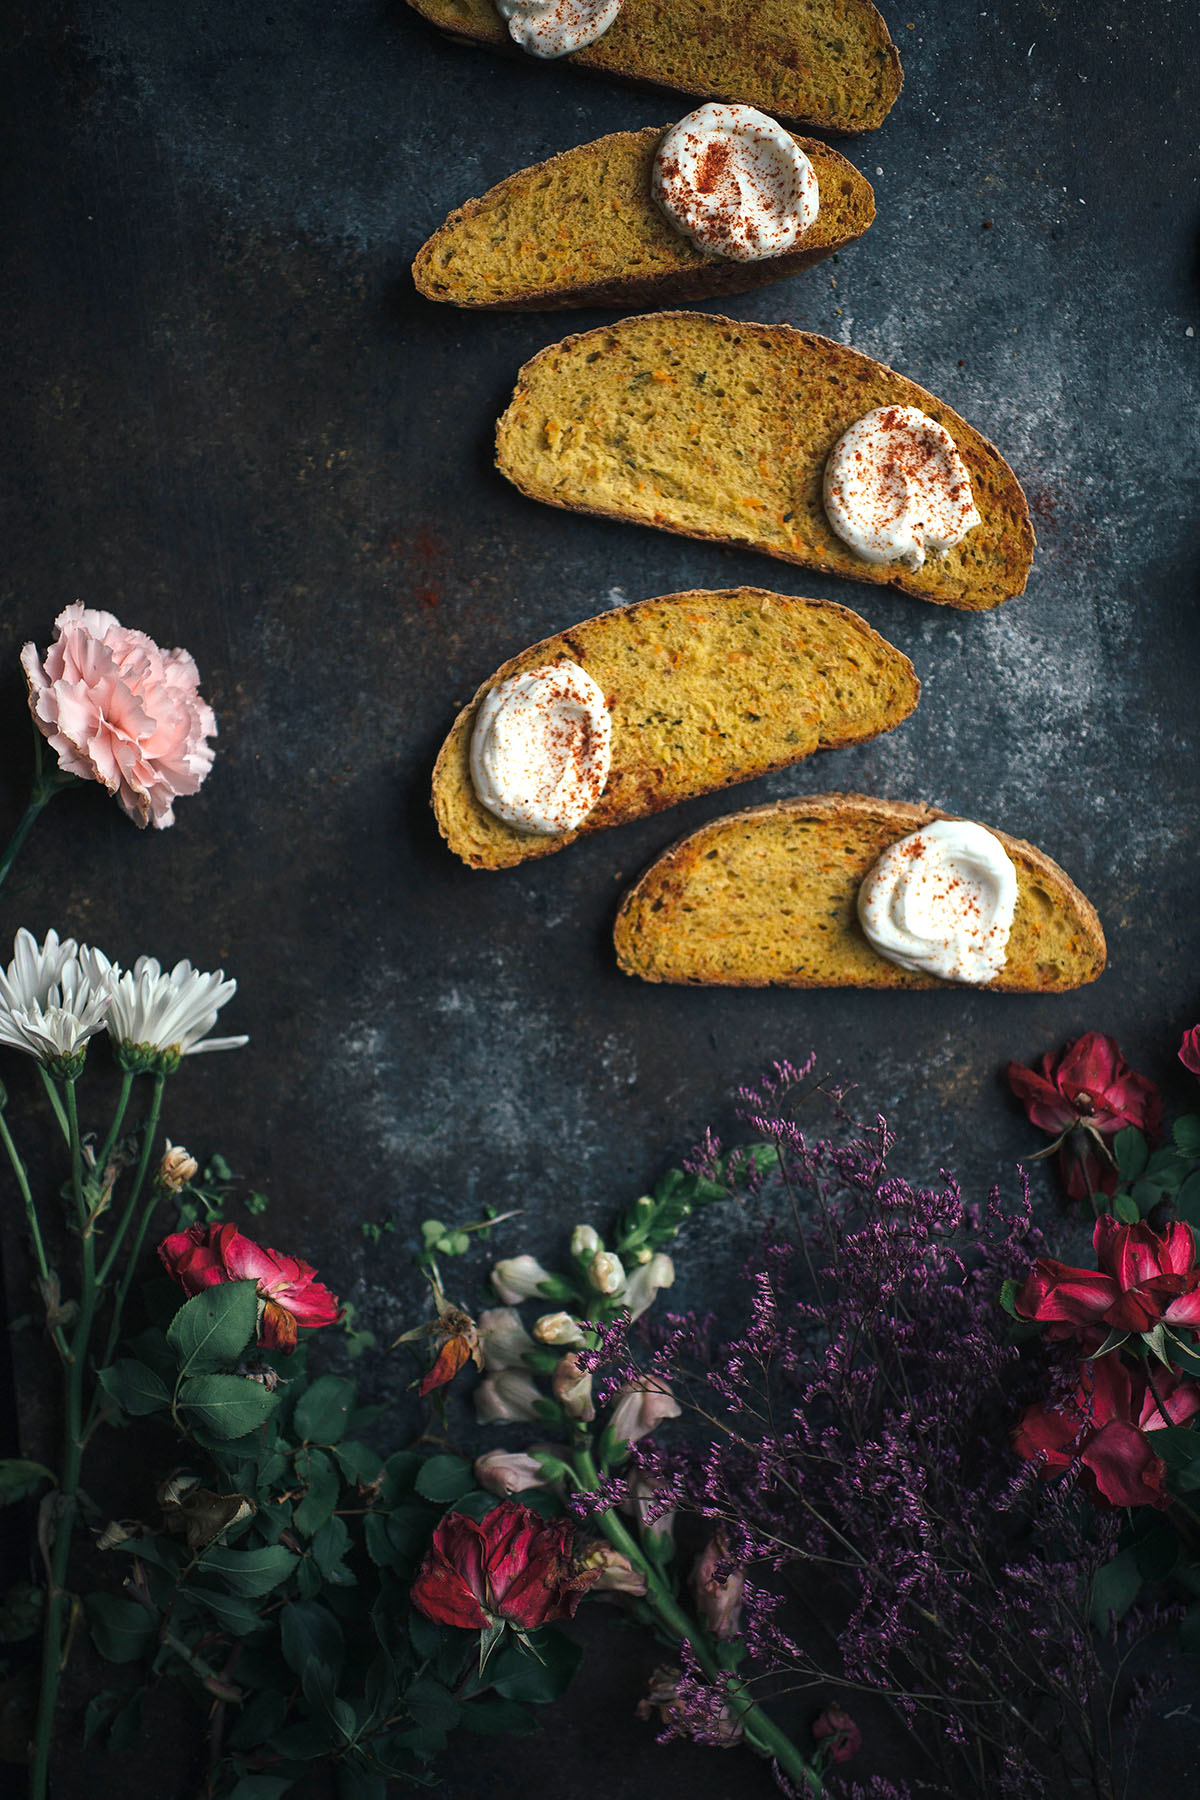 slices of vegetable bread topped with yogurt next to flowers